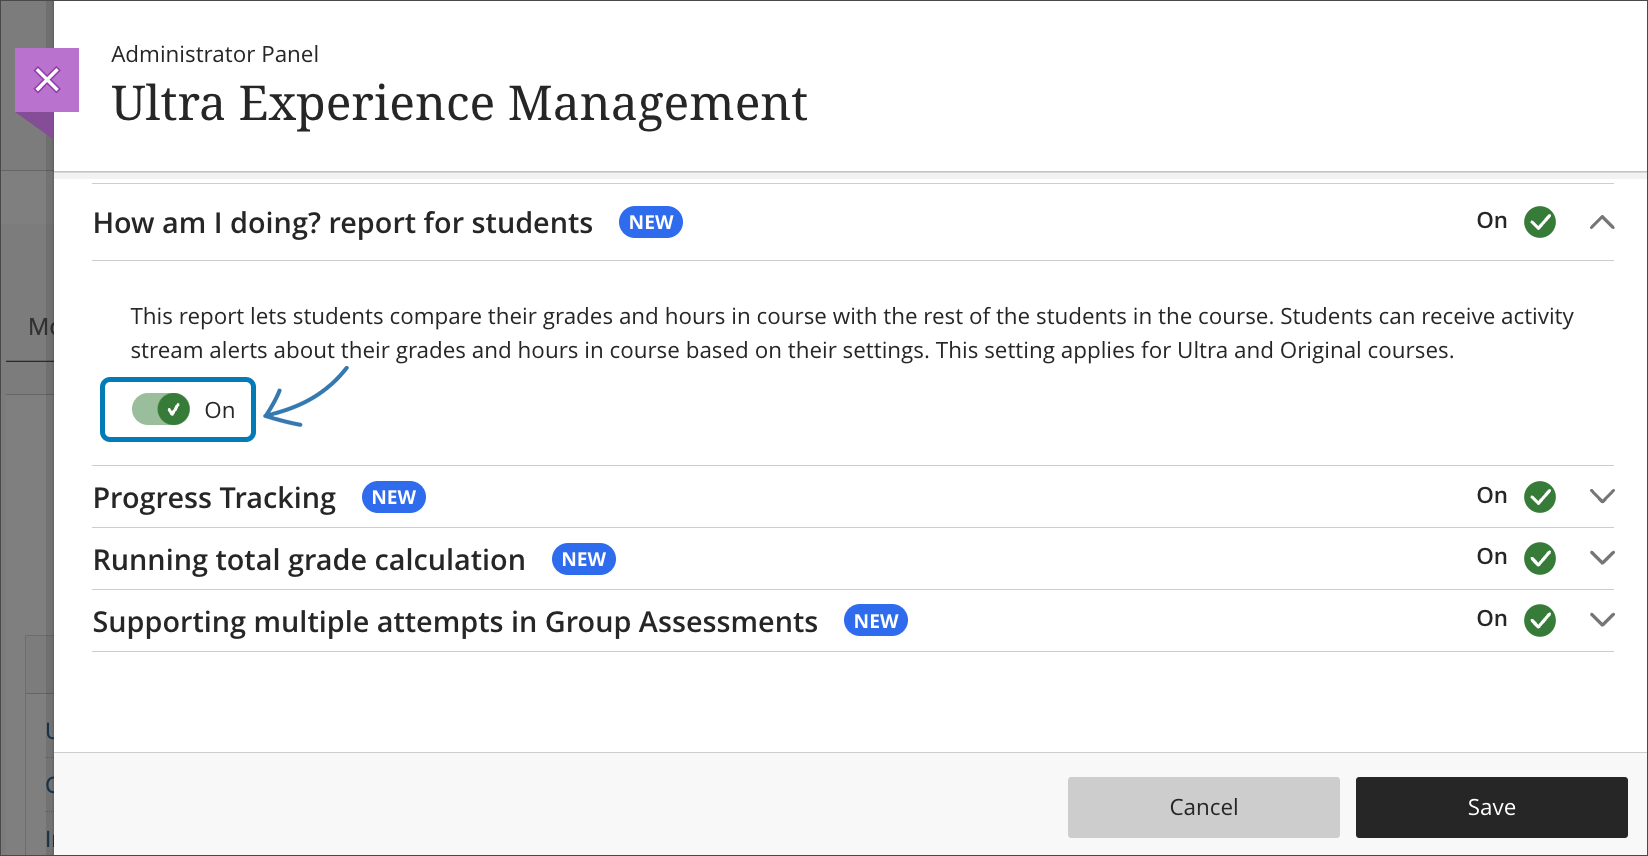 An administrator toggles the “How Am I Doing?” report for students to “Off”